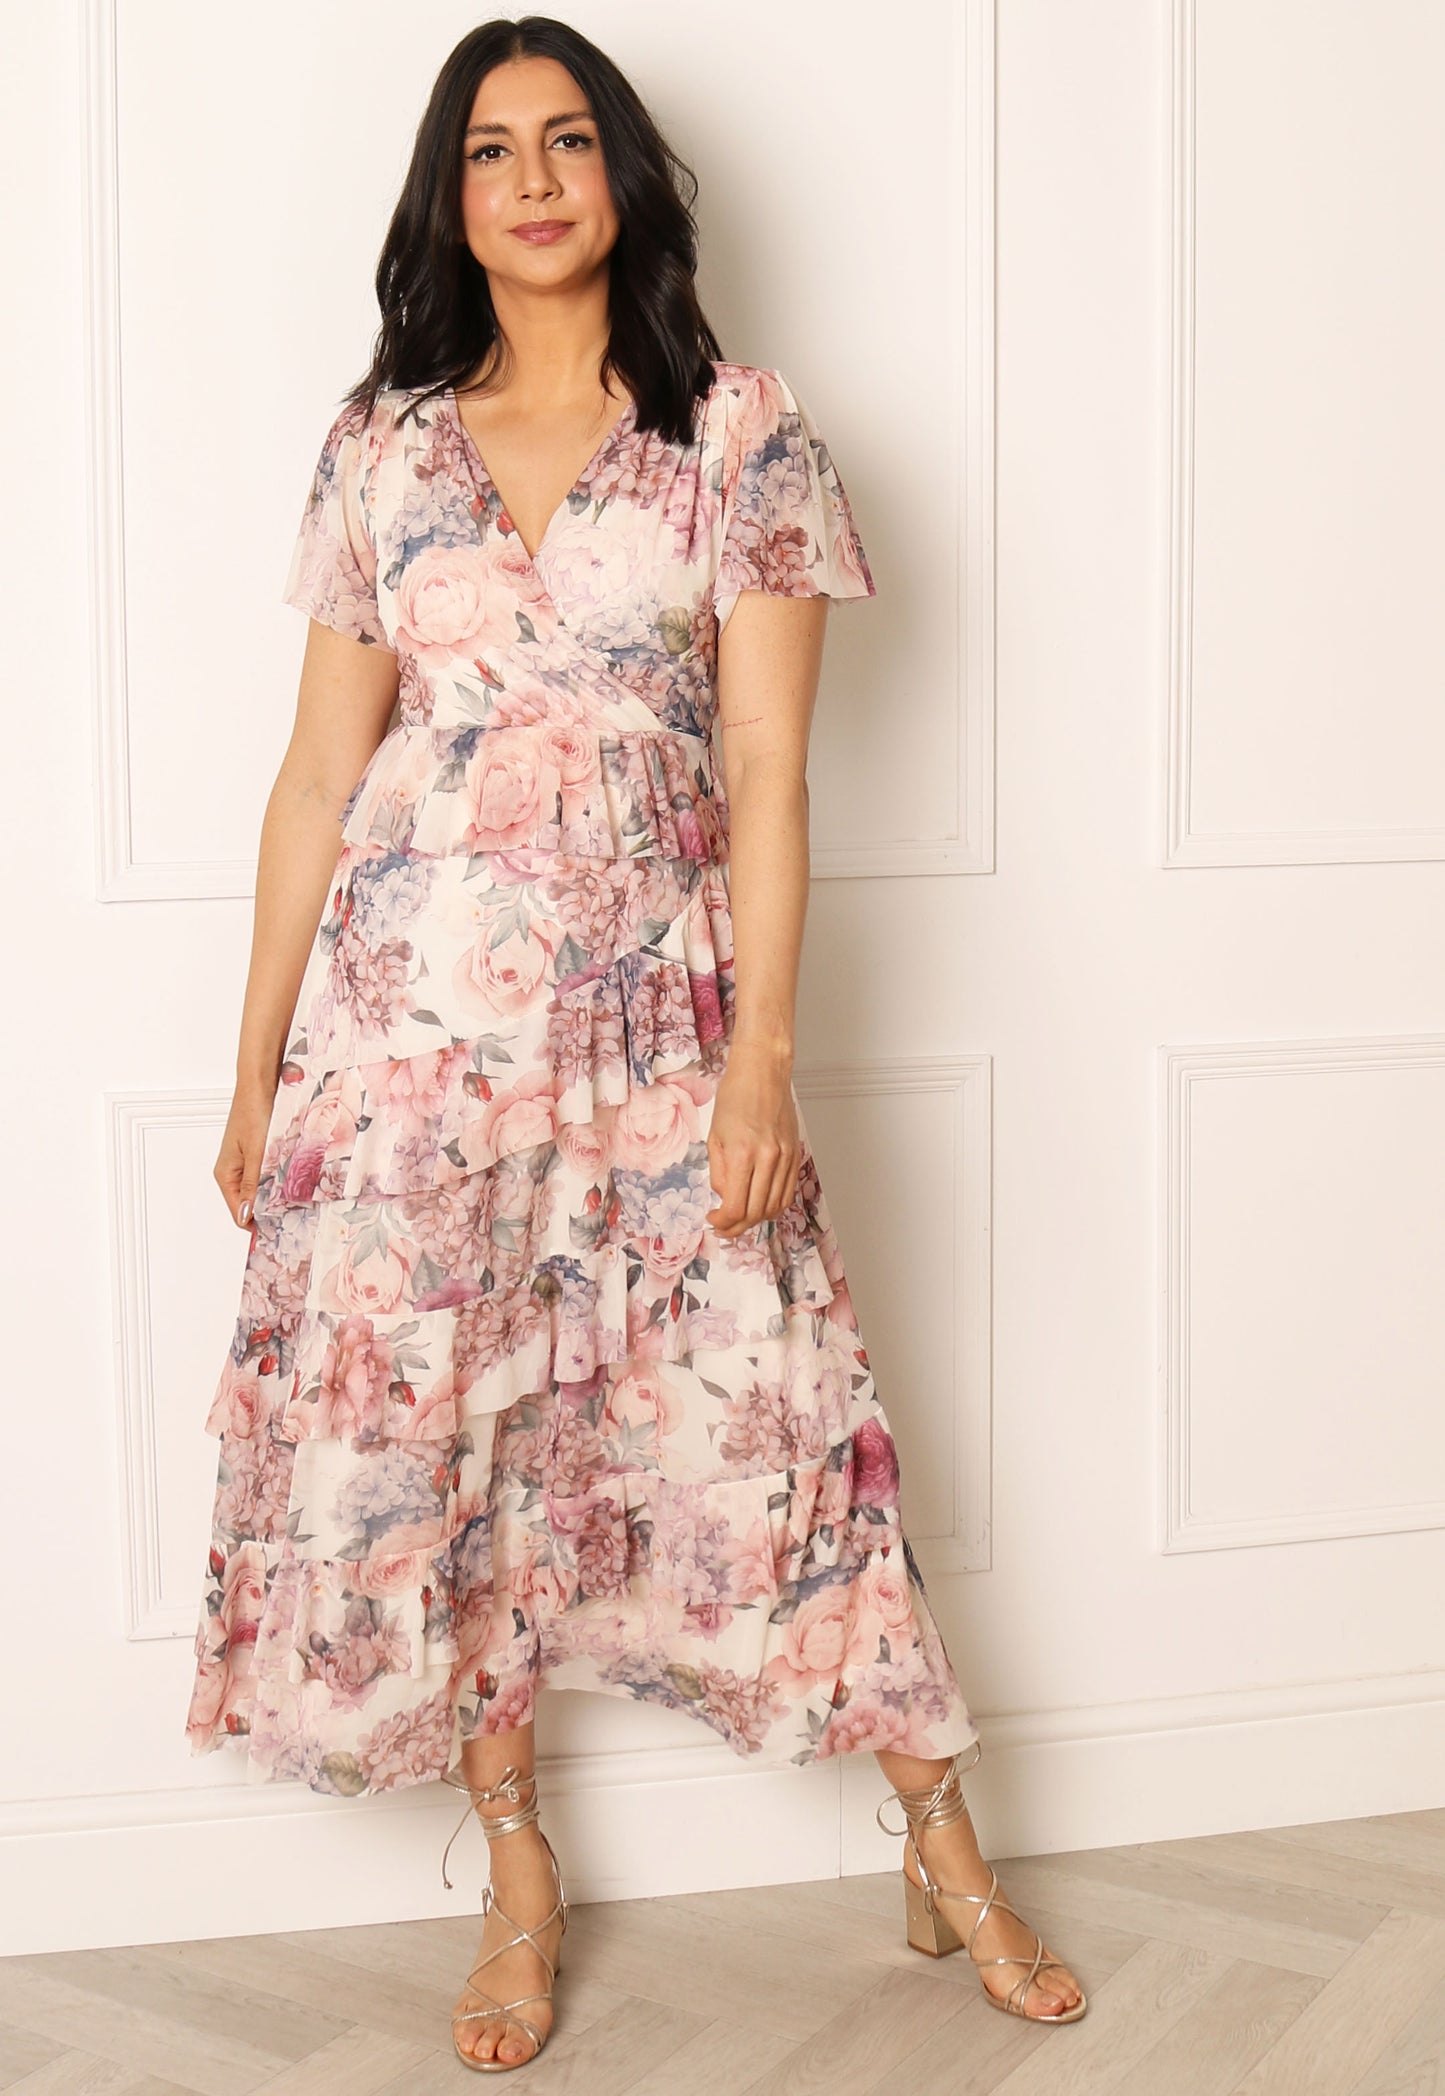 
                  
                    VERO MODA Blair Floral Print Wrap Top Tiered Midi Dress in Pink & Cream Tones - One Nation Clothing
                  
                